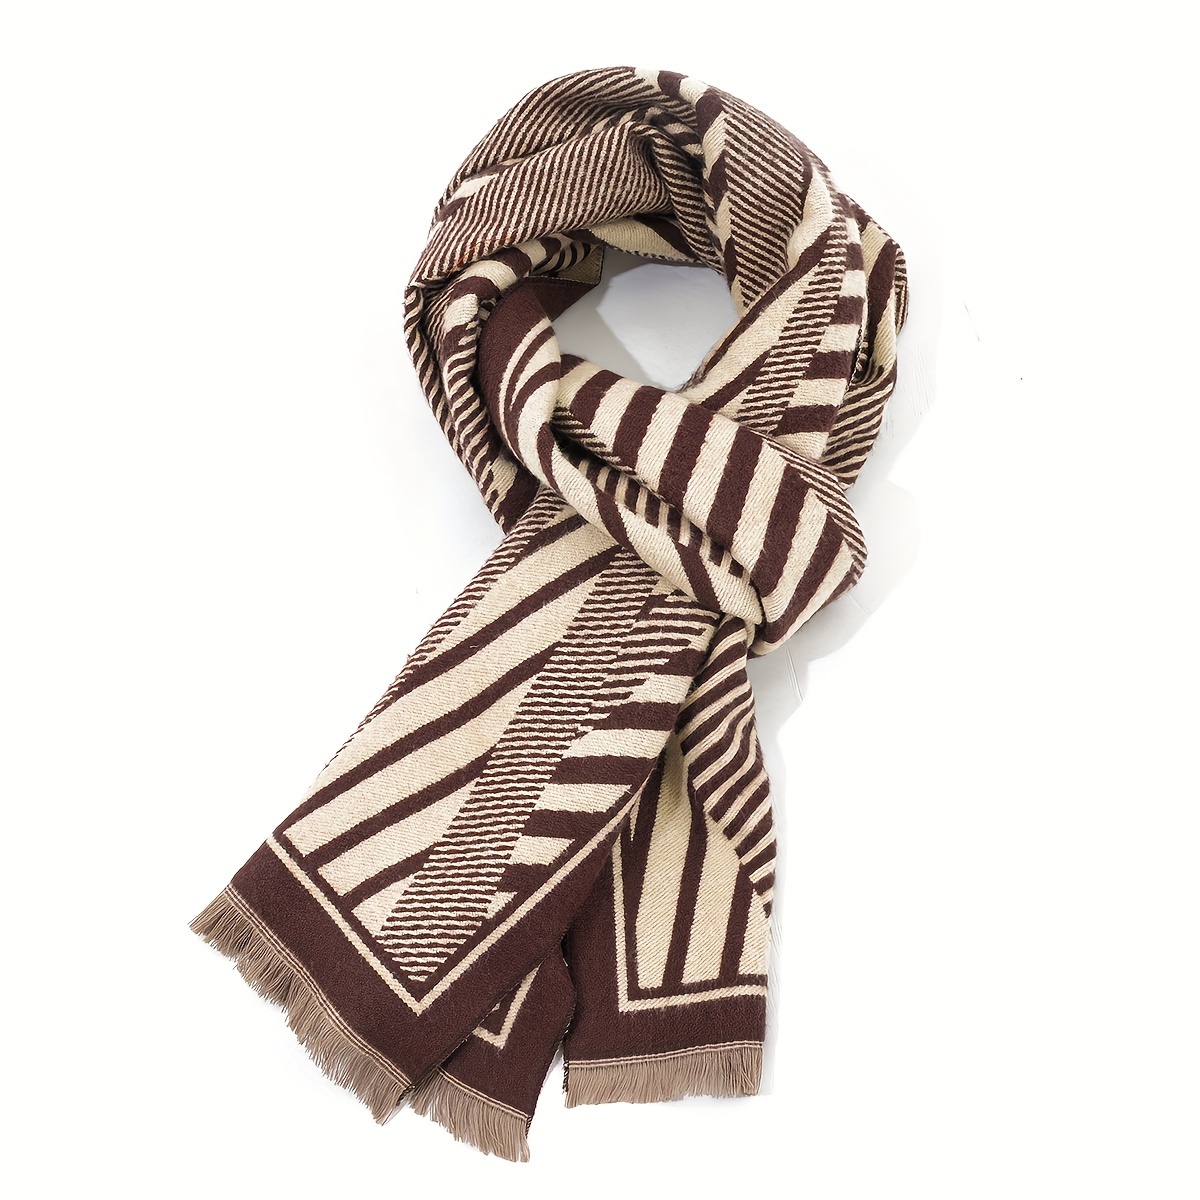 1pc Mens Multicolor Thickened Zebra Pattern Jacquard Cashmere Scarf Shawl  Dual Use Autumn Winter Daily Outside Decoration Windproof Travel Photo Wear, Shop Limited-time Deals